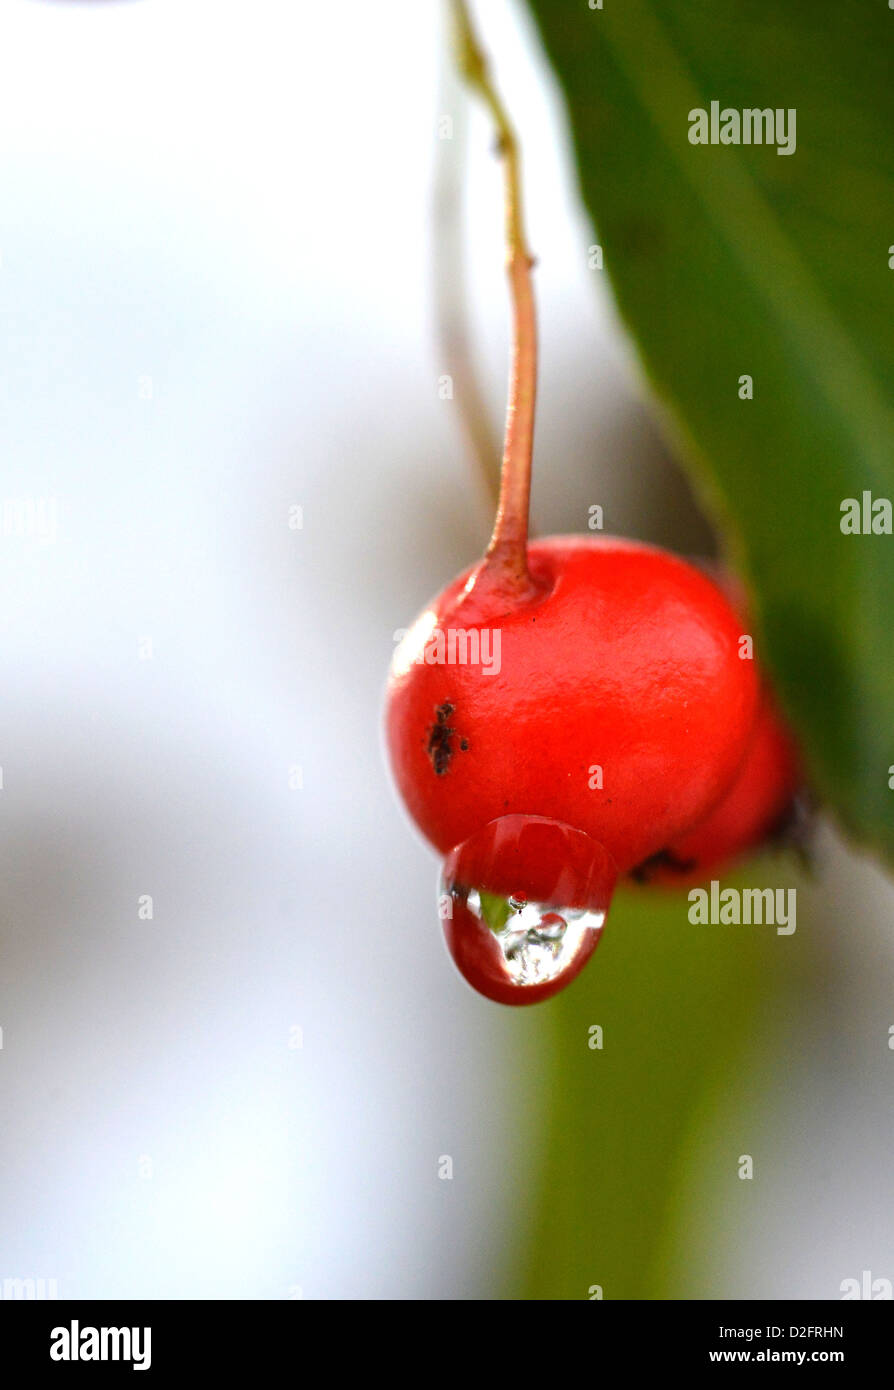 A close-up photograph of a melting ice droplet on red Cotoneaster berries. Stock Photo